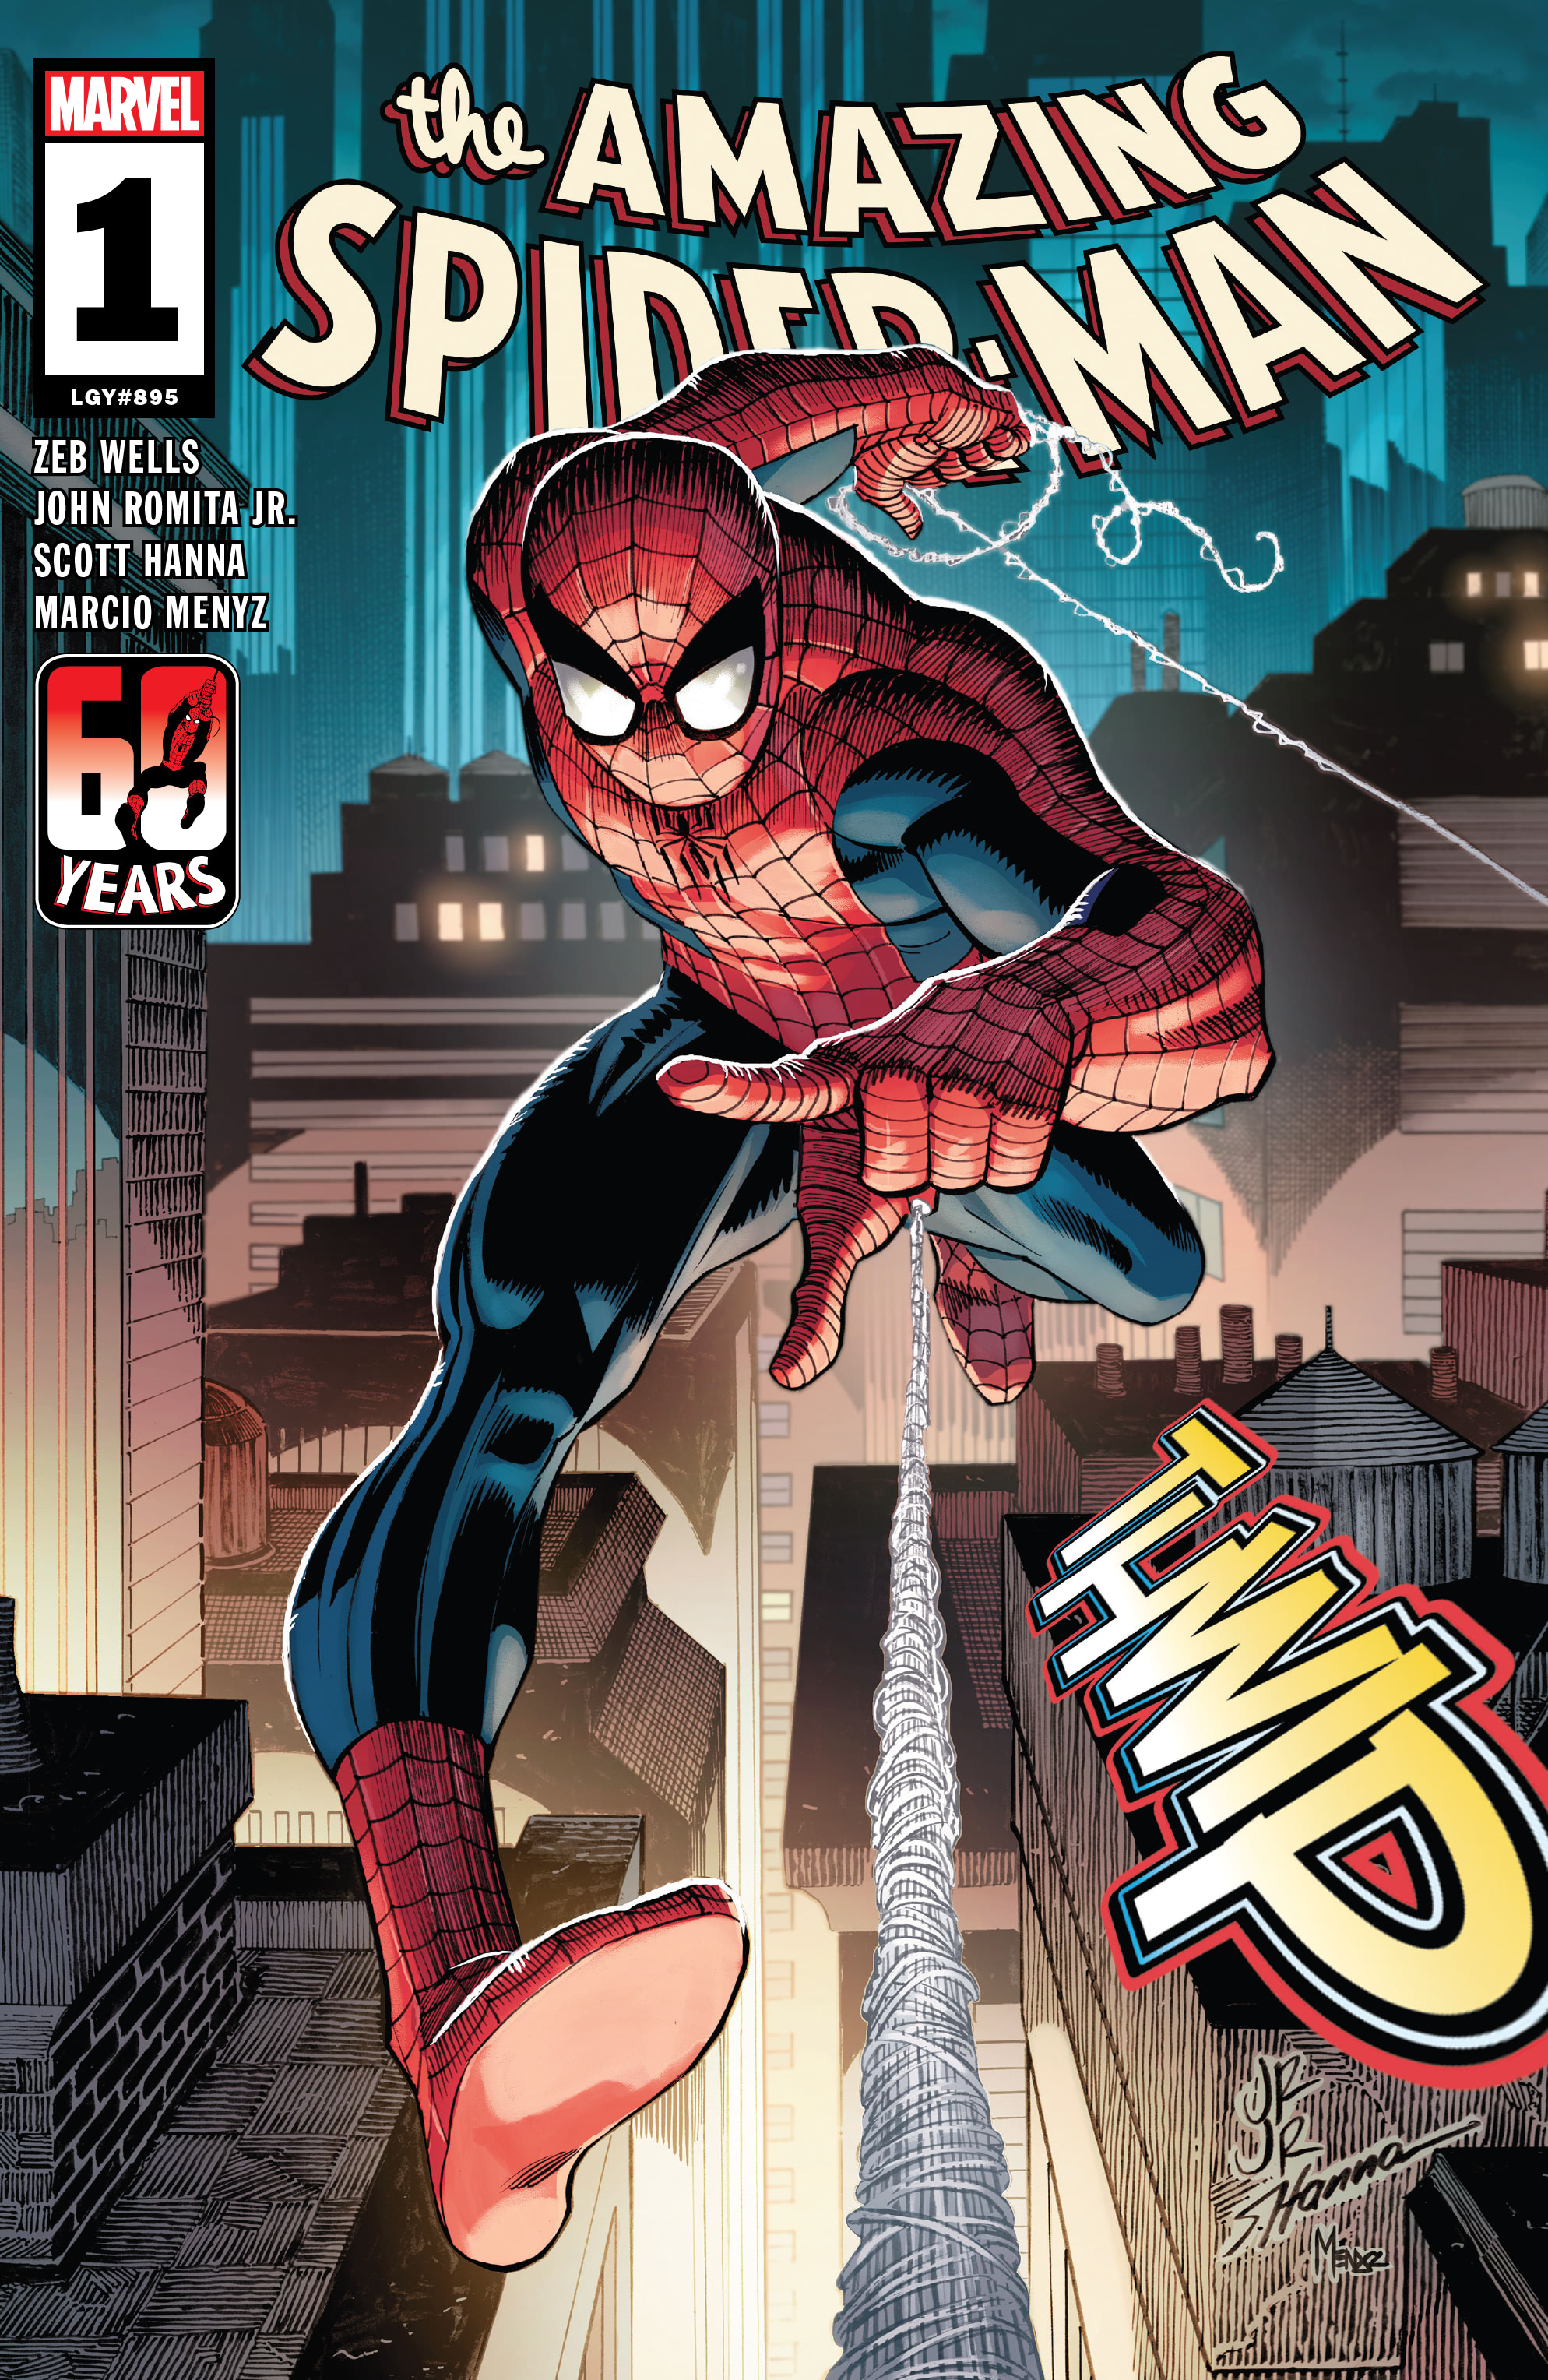 Read the amazing spider man comics online for free